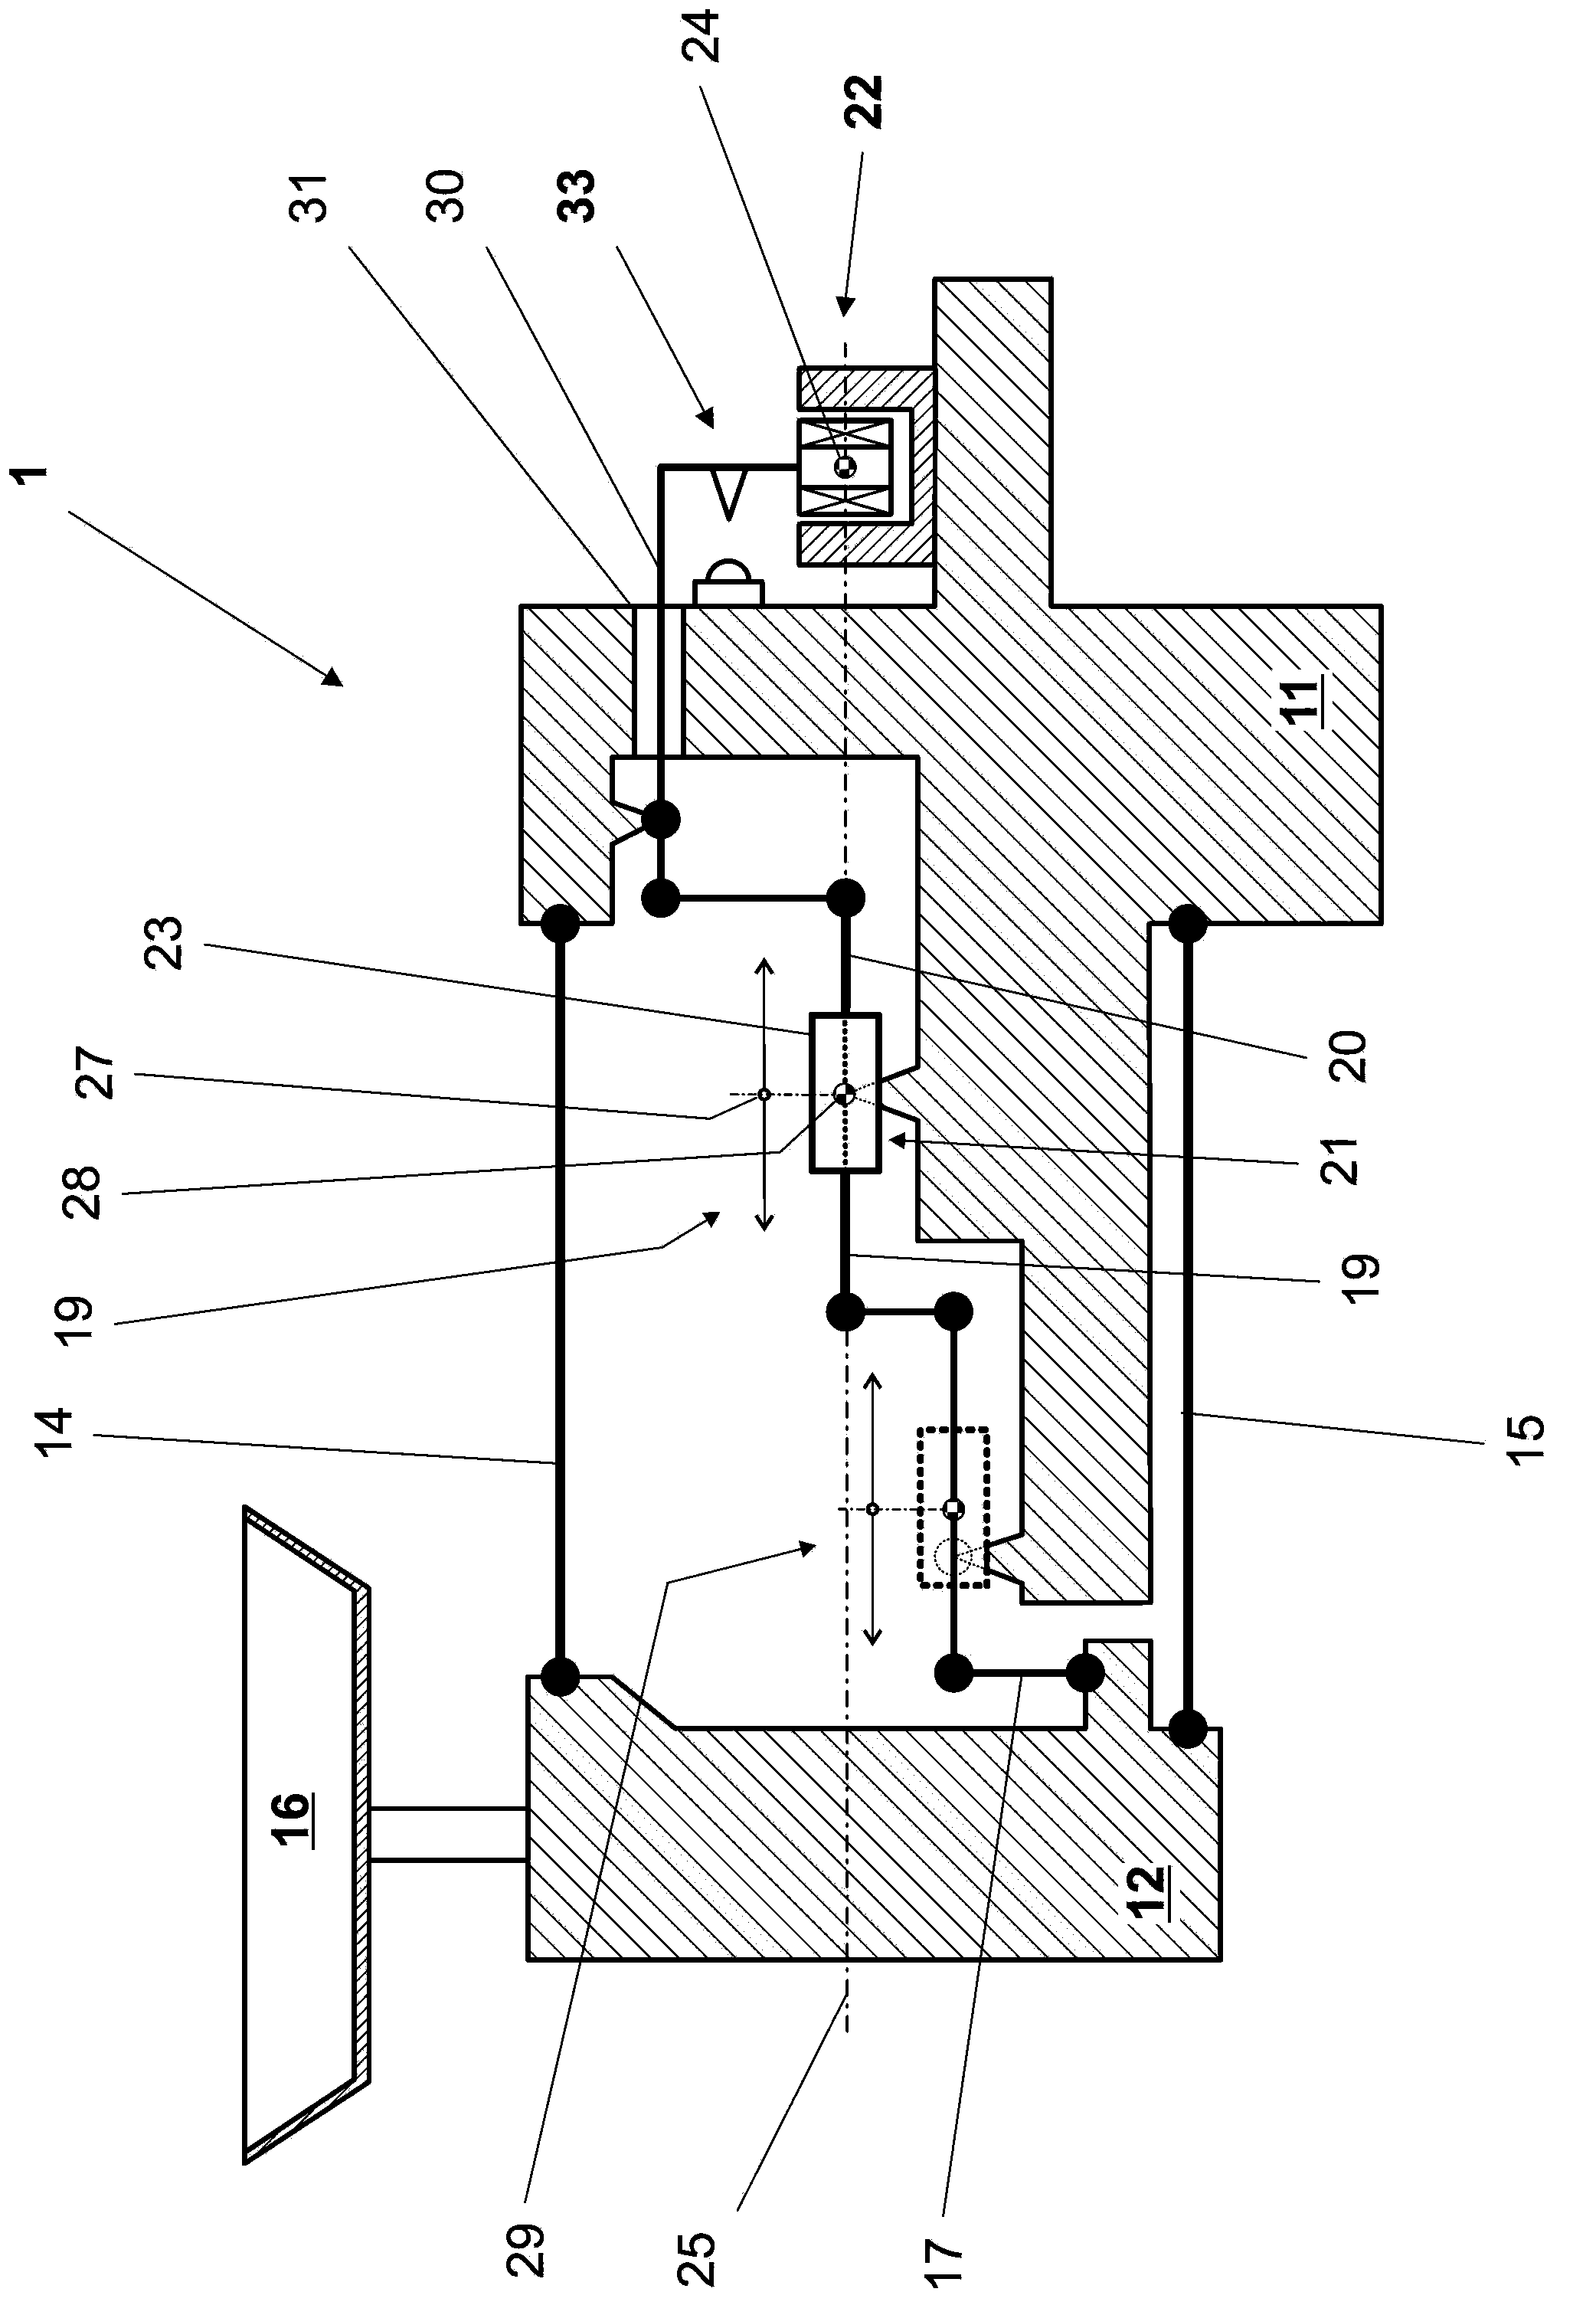 Force-measuring device with sliding weight